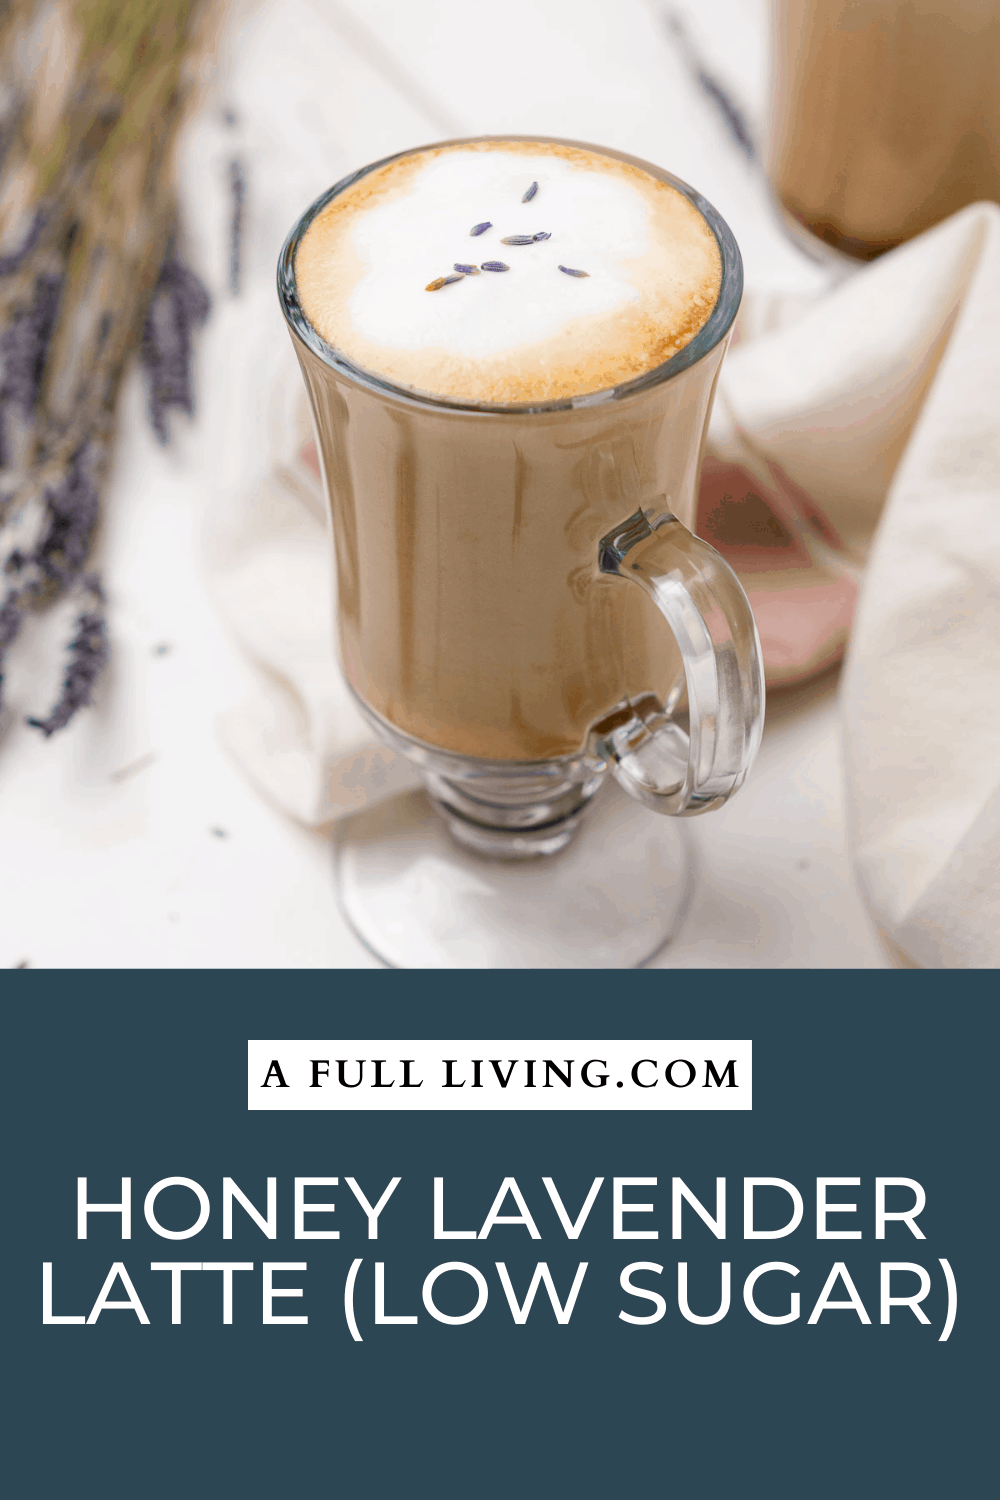 honey lavender latte low sugar graphic with text